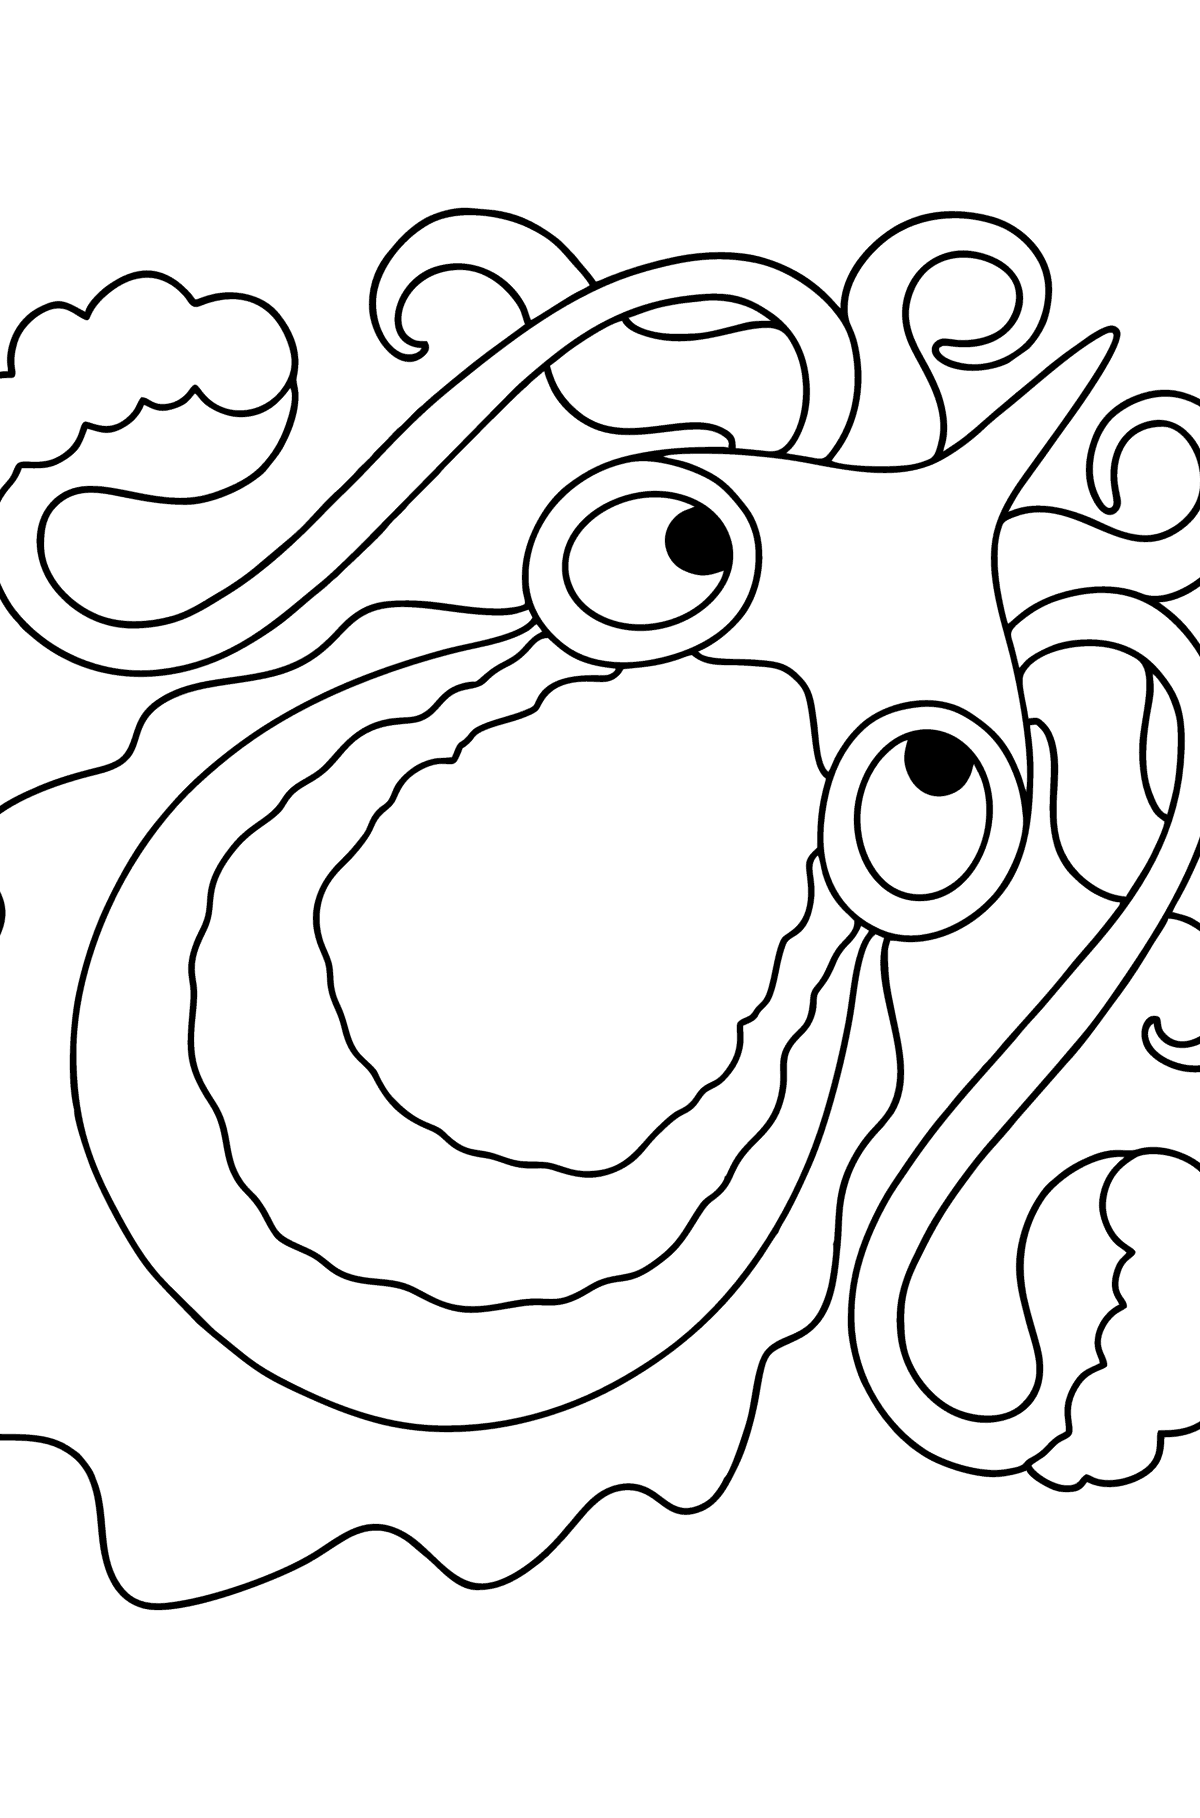 Cuttlefish coloring page - Coloring Pages for Kids